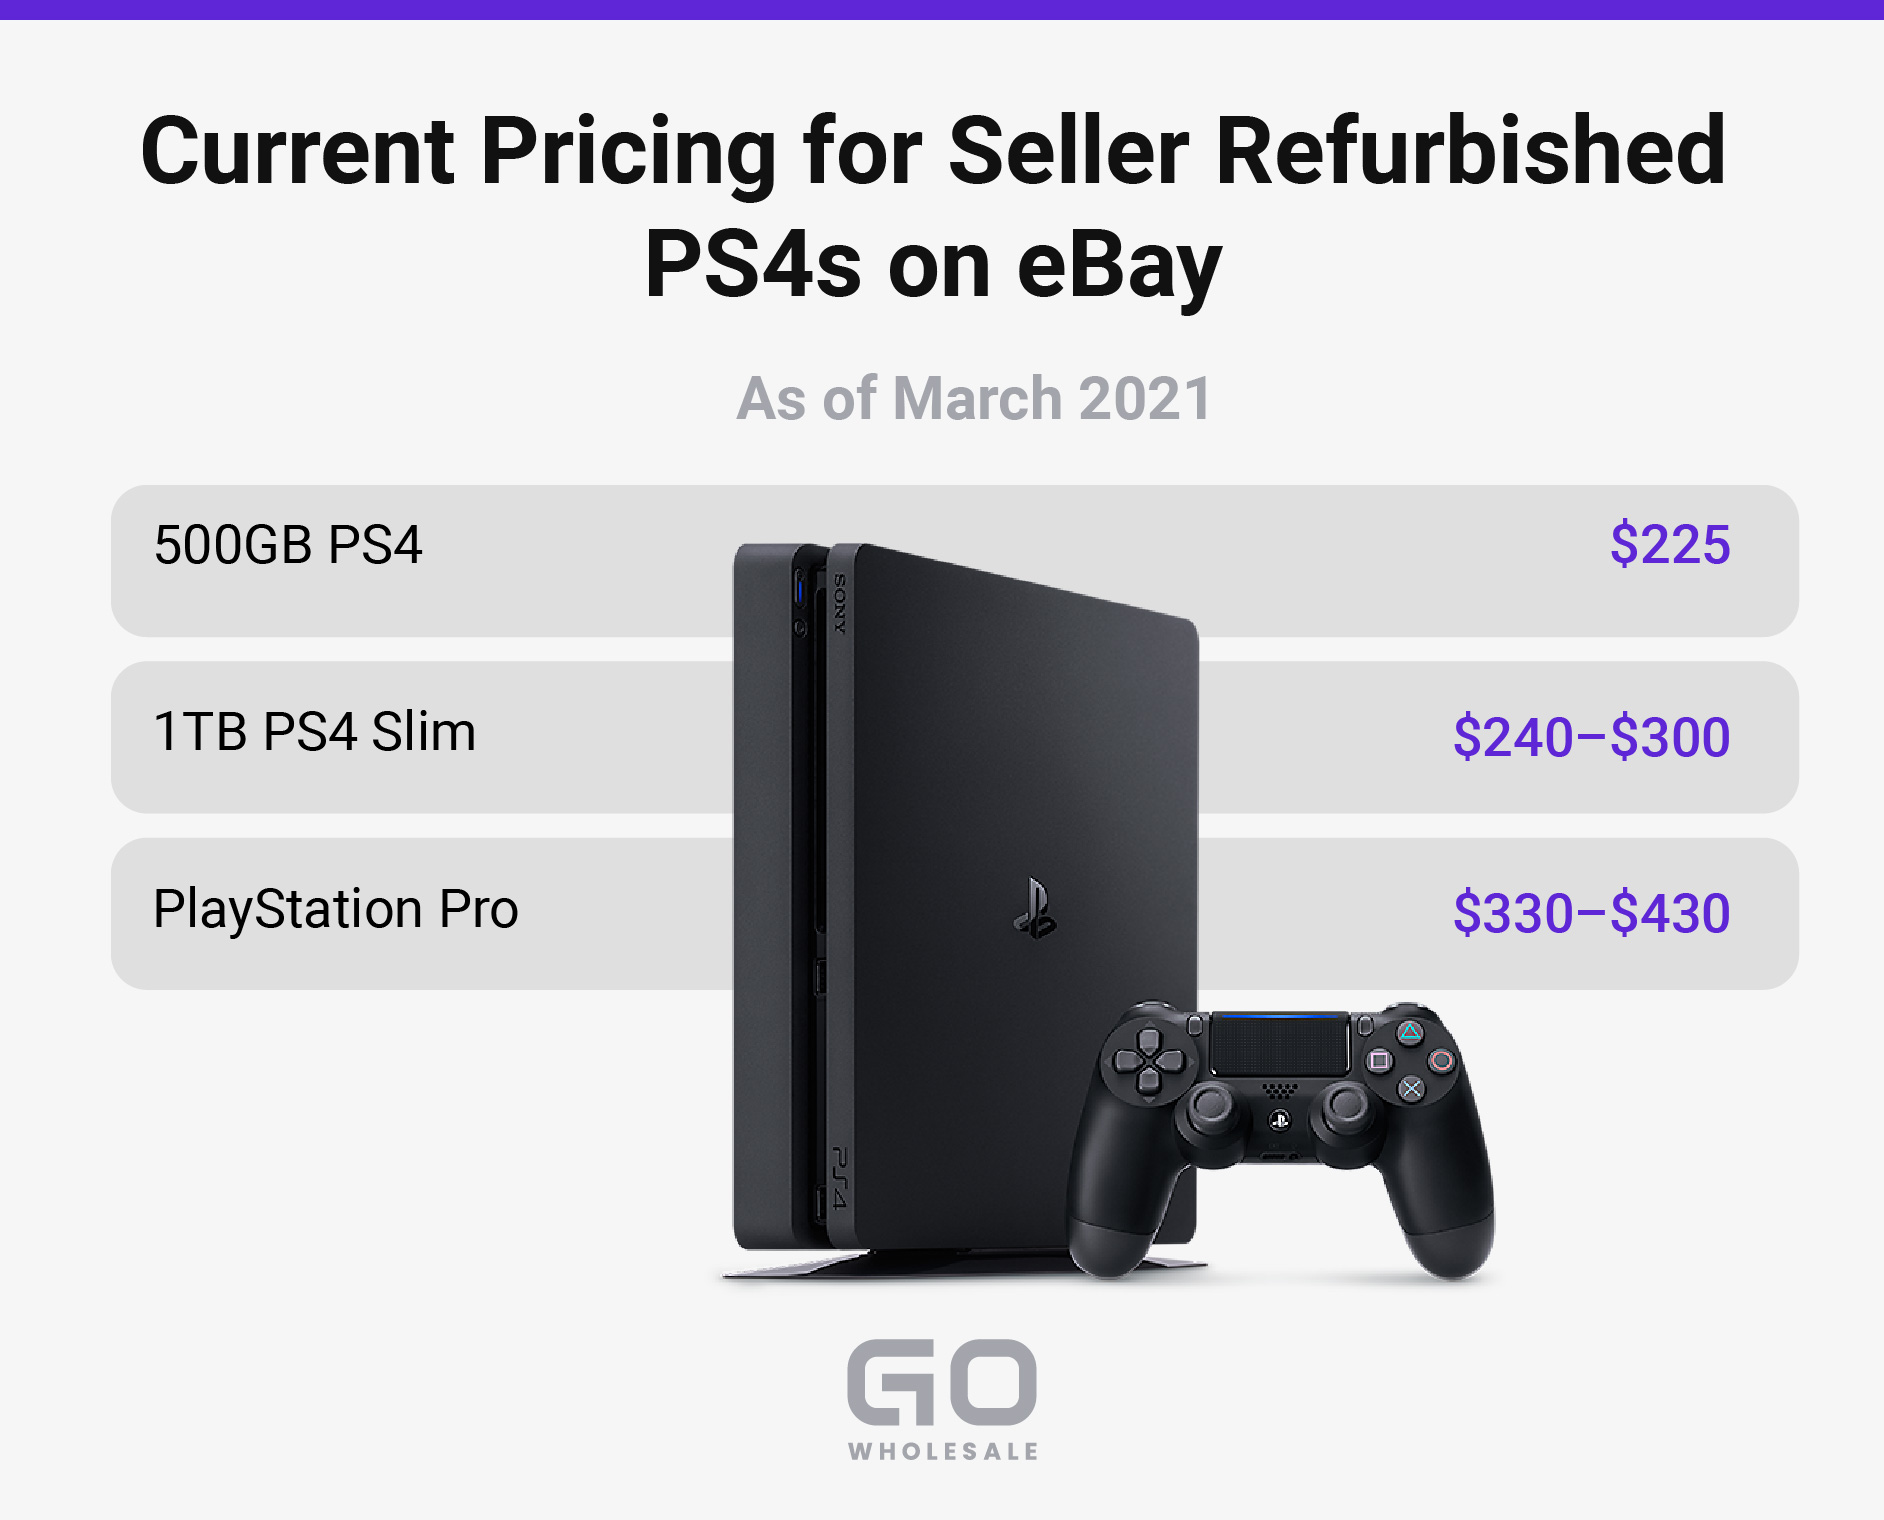 taktik andrageren ressource Sony PS4 Wholesalers: Why Buy Refurbished Inventory?